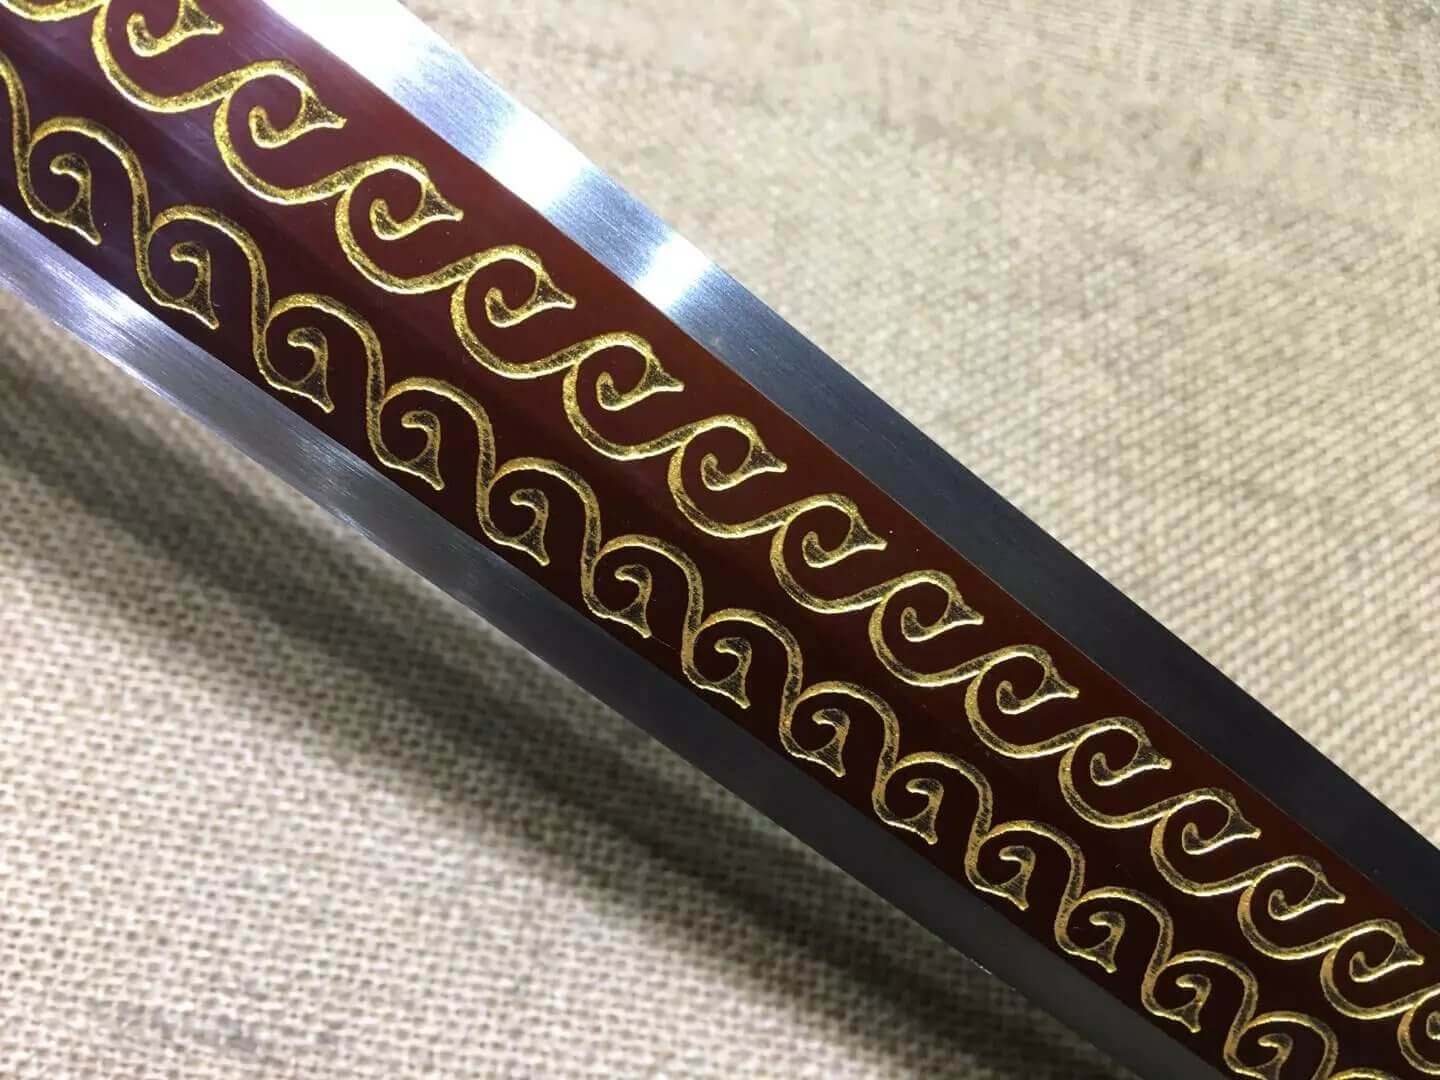 Fengyun jian,High manganese steel blade,Rosewood scabbard,Alloy fitting - Chinese sword shop